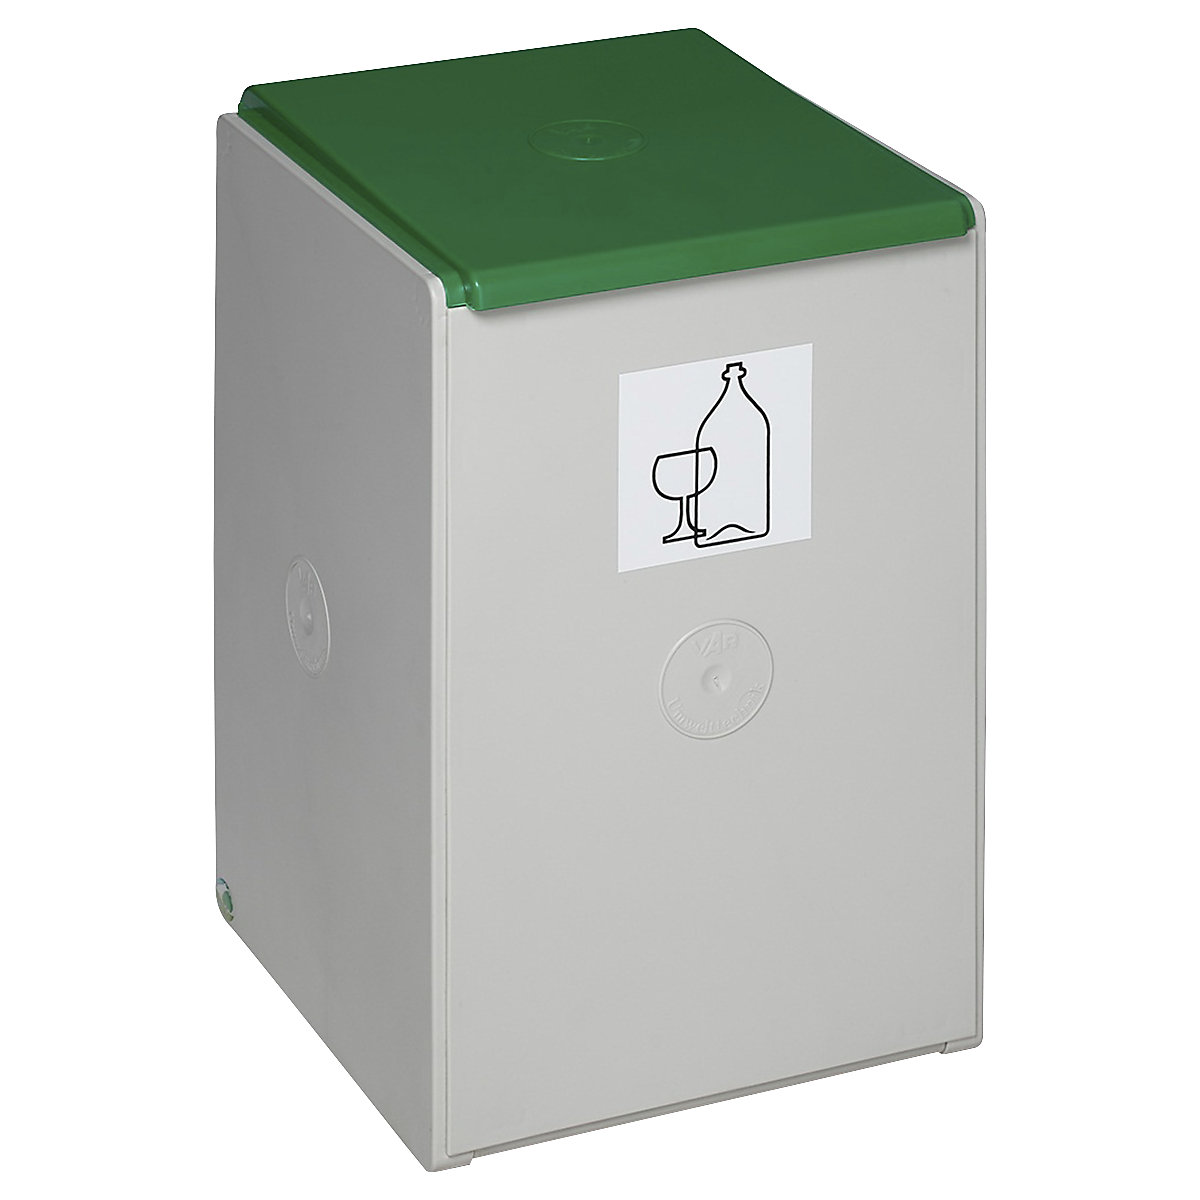 Recyclable waste collector made of plastic – VAR